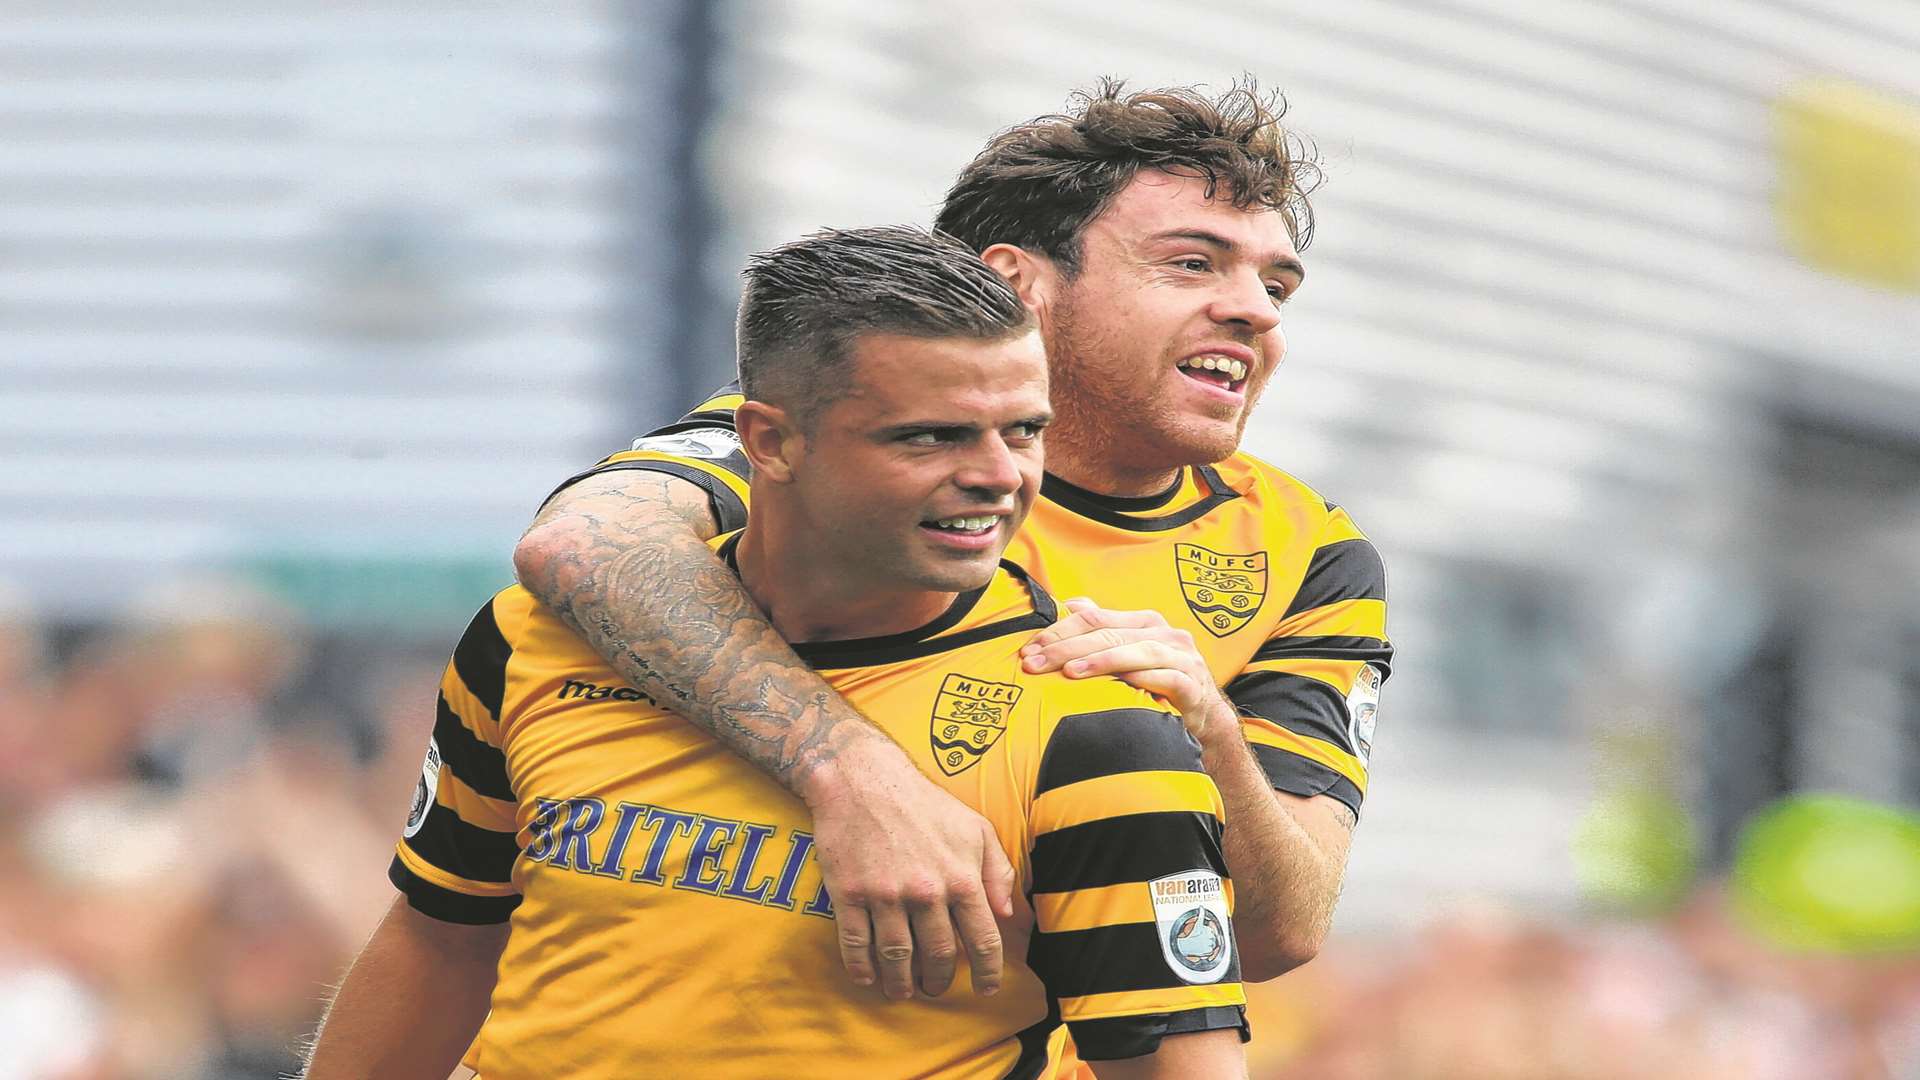 Ben Greenhalgh and Jack Evans could be leaving Maidstone Picture: John Westhrop